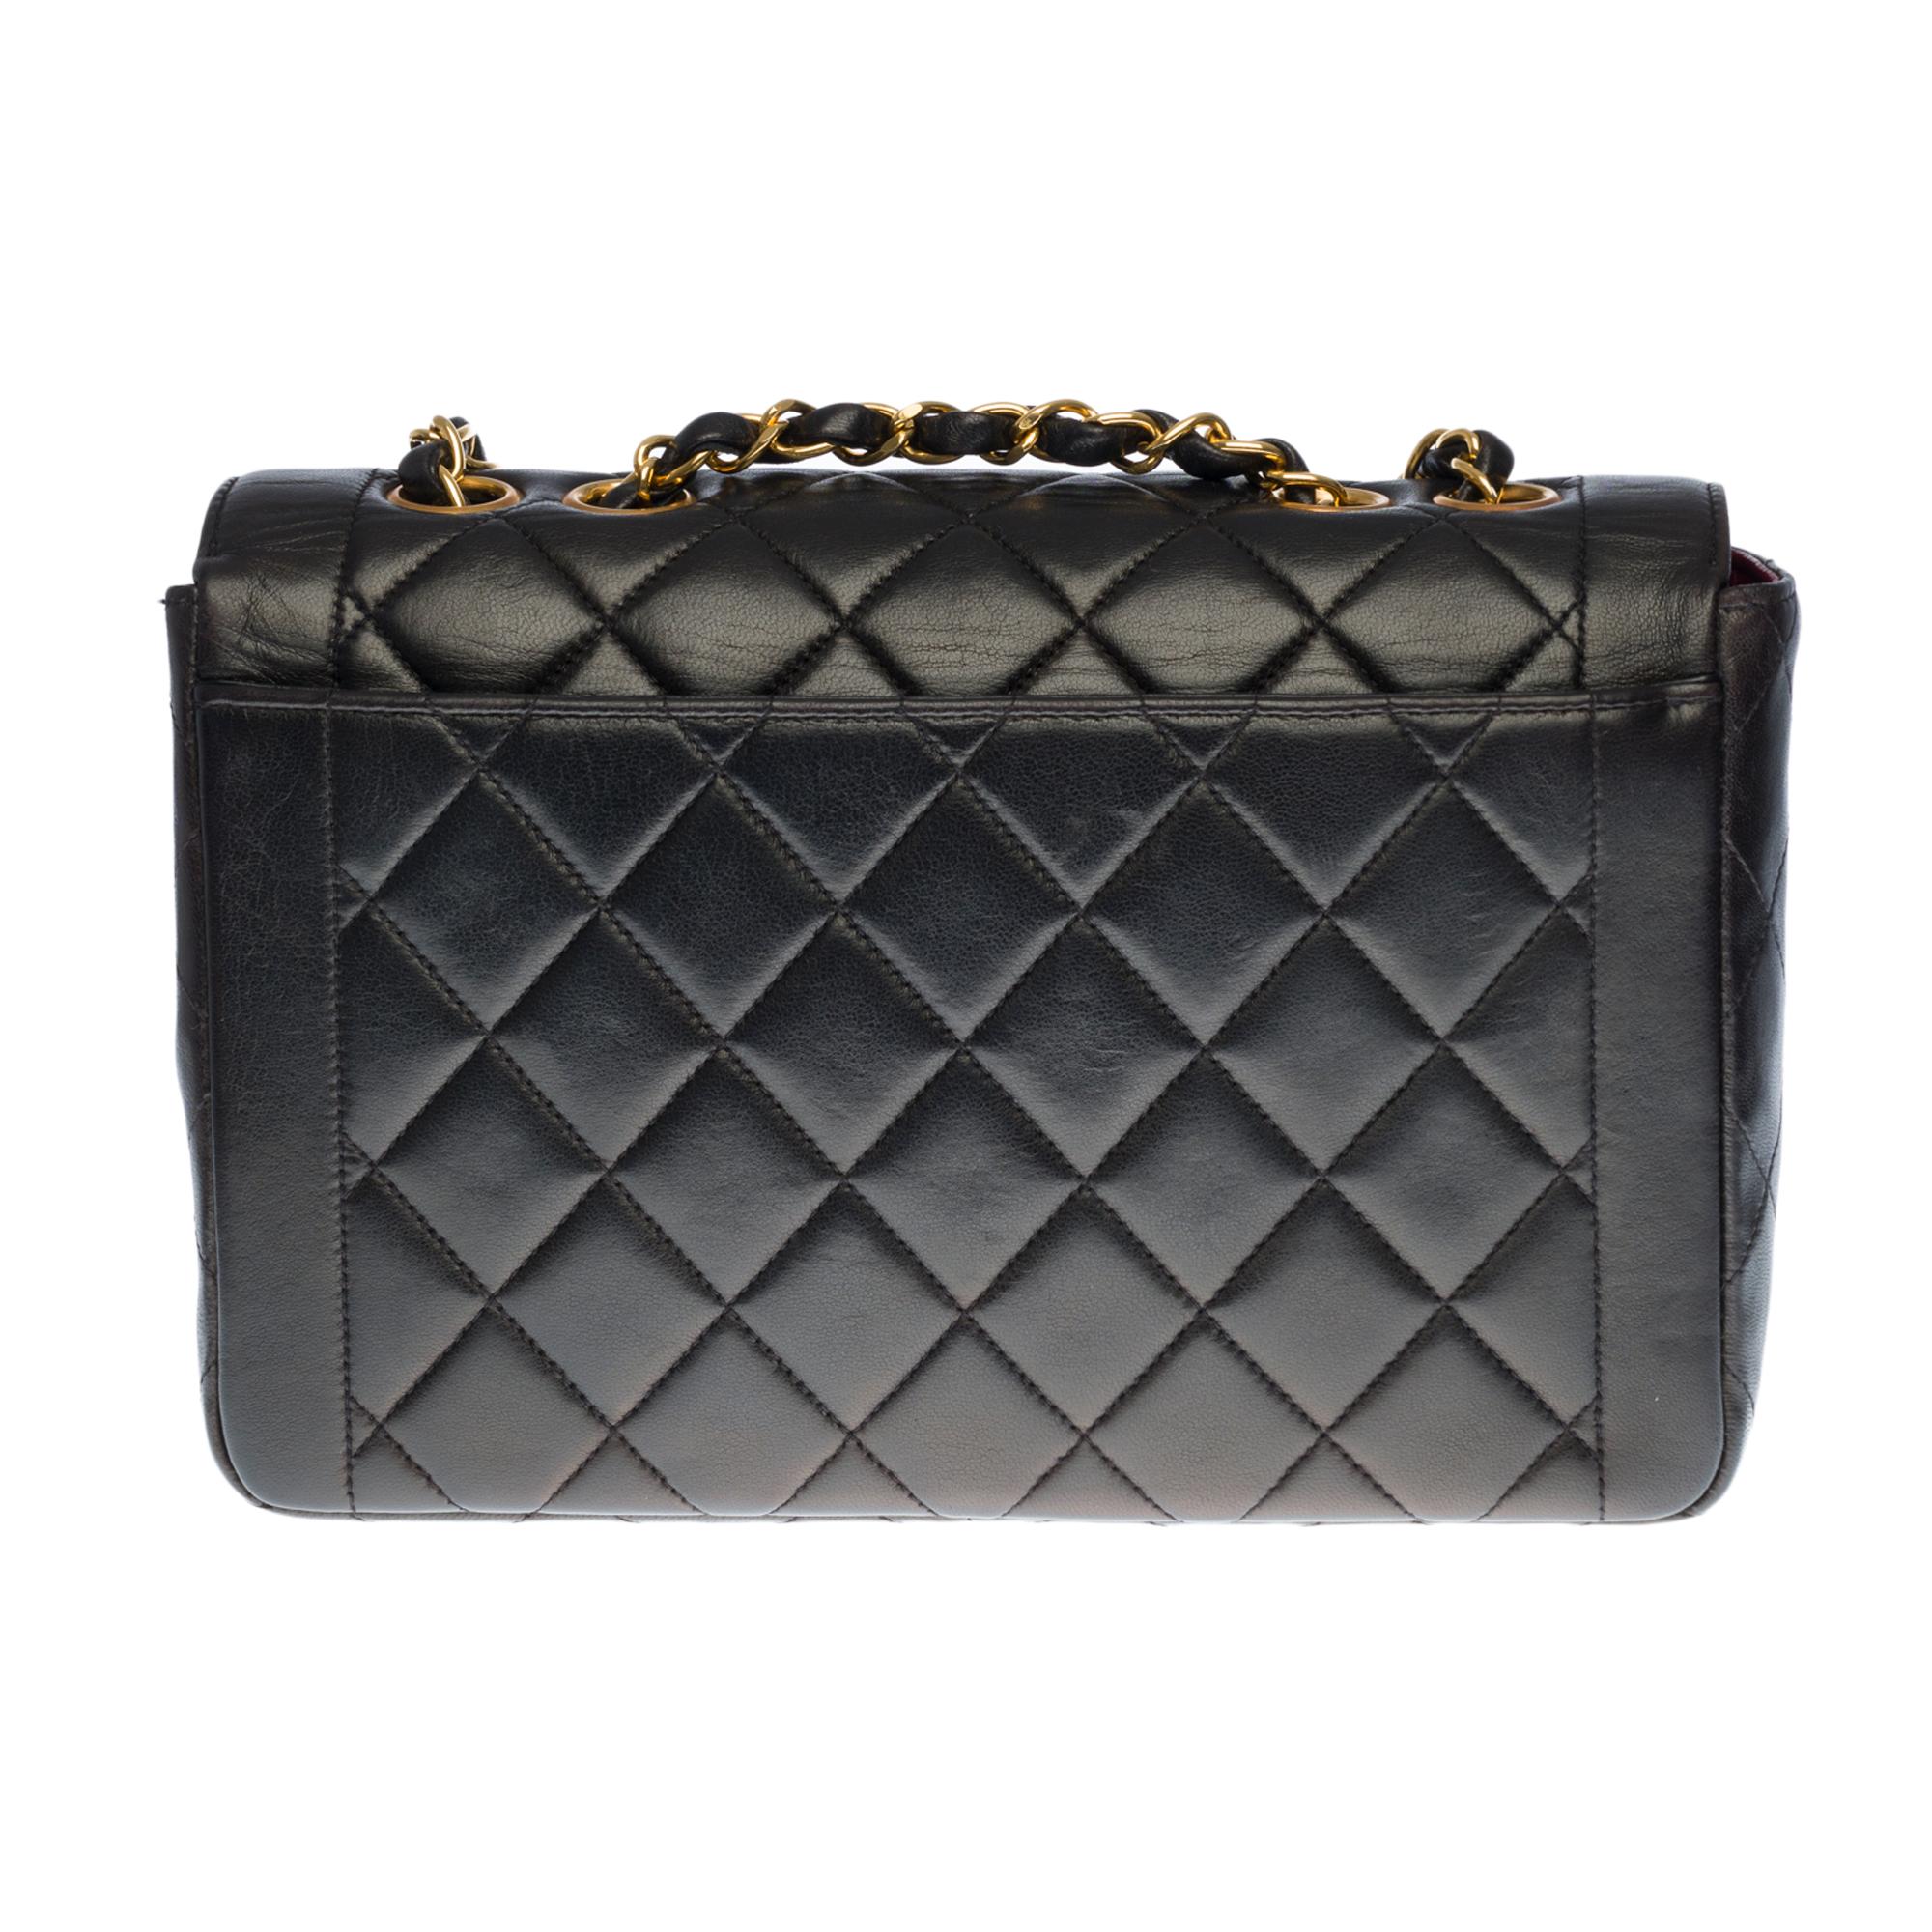 Beautiful Chanel Classic shoulder flap bag in black quilted lambskin, gold-plated metal hardware, a gold-plated metal chain handle interlaced with black leather for hand or shoulder support

Gold Metal Flap Closure
A patch pocket on the back of the